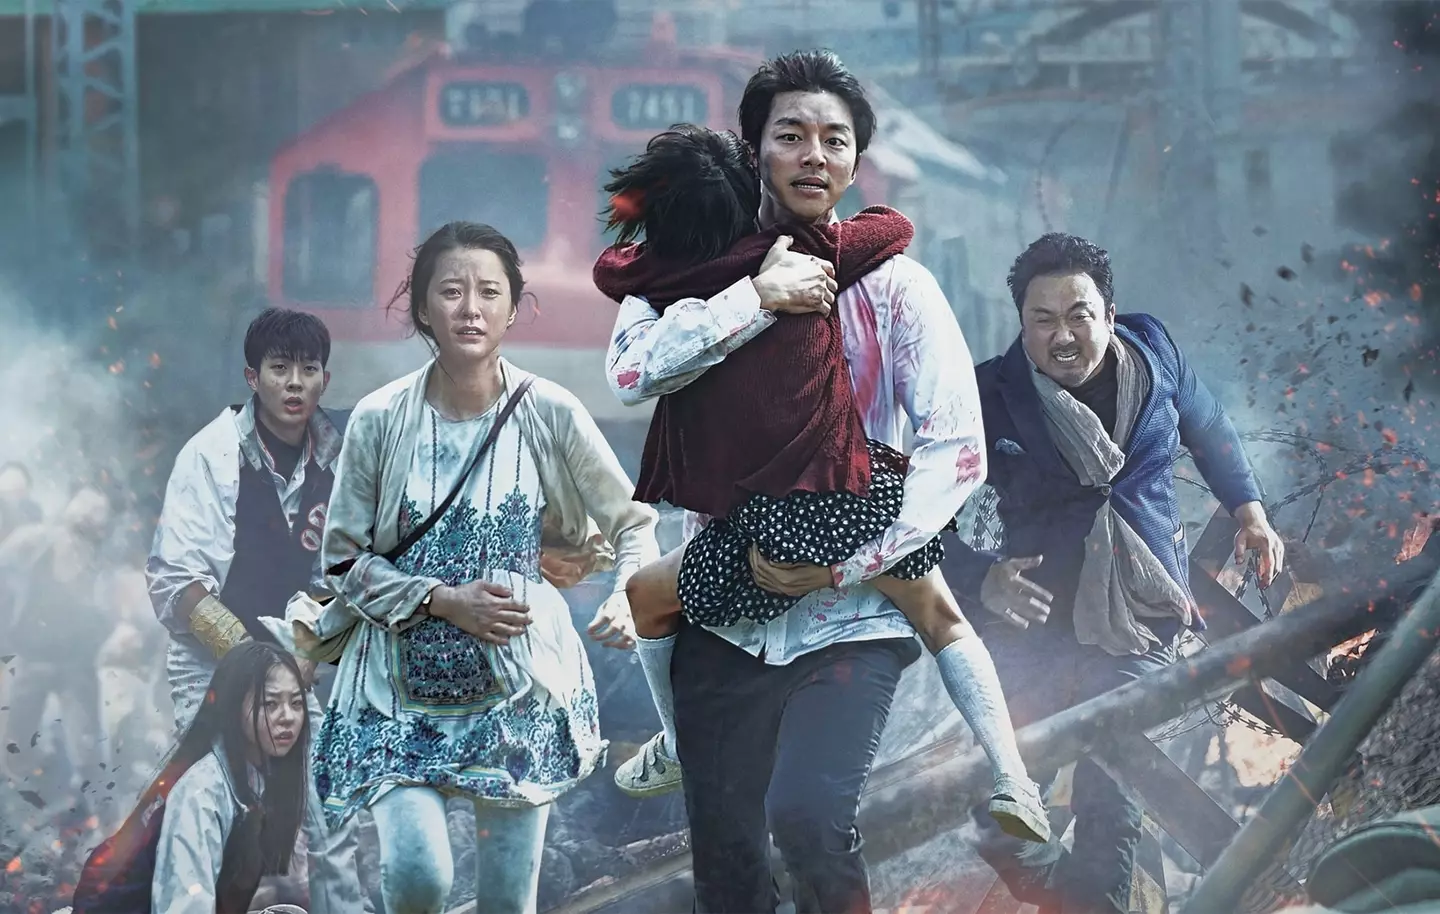 Train to Busan is a Zombie blockbuster set in South Korea (